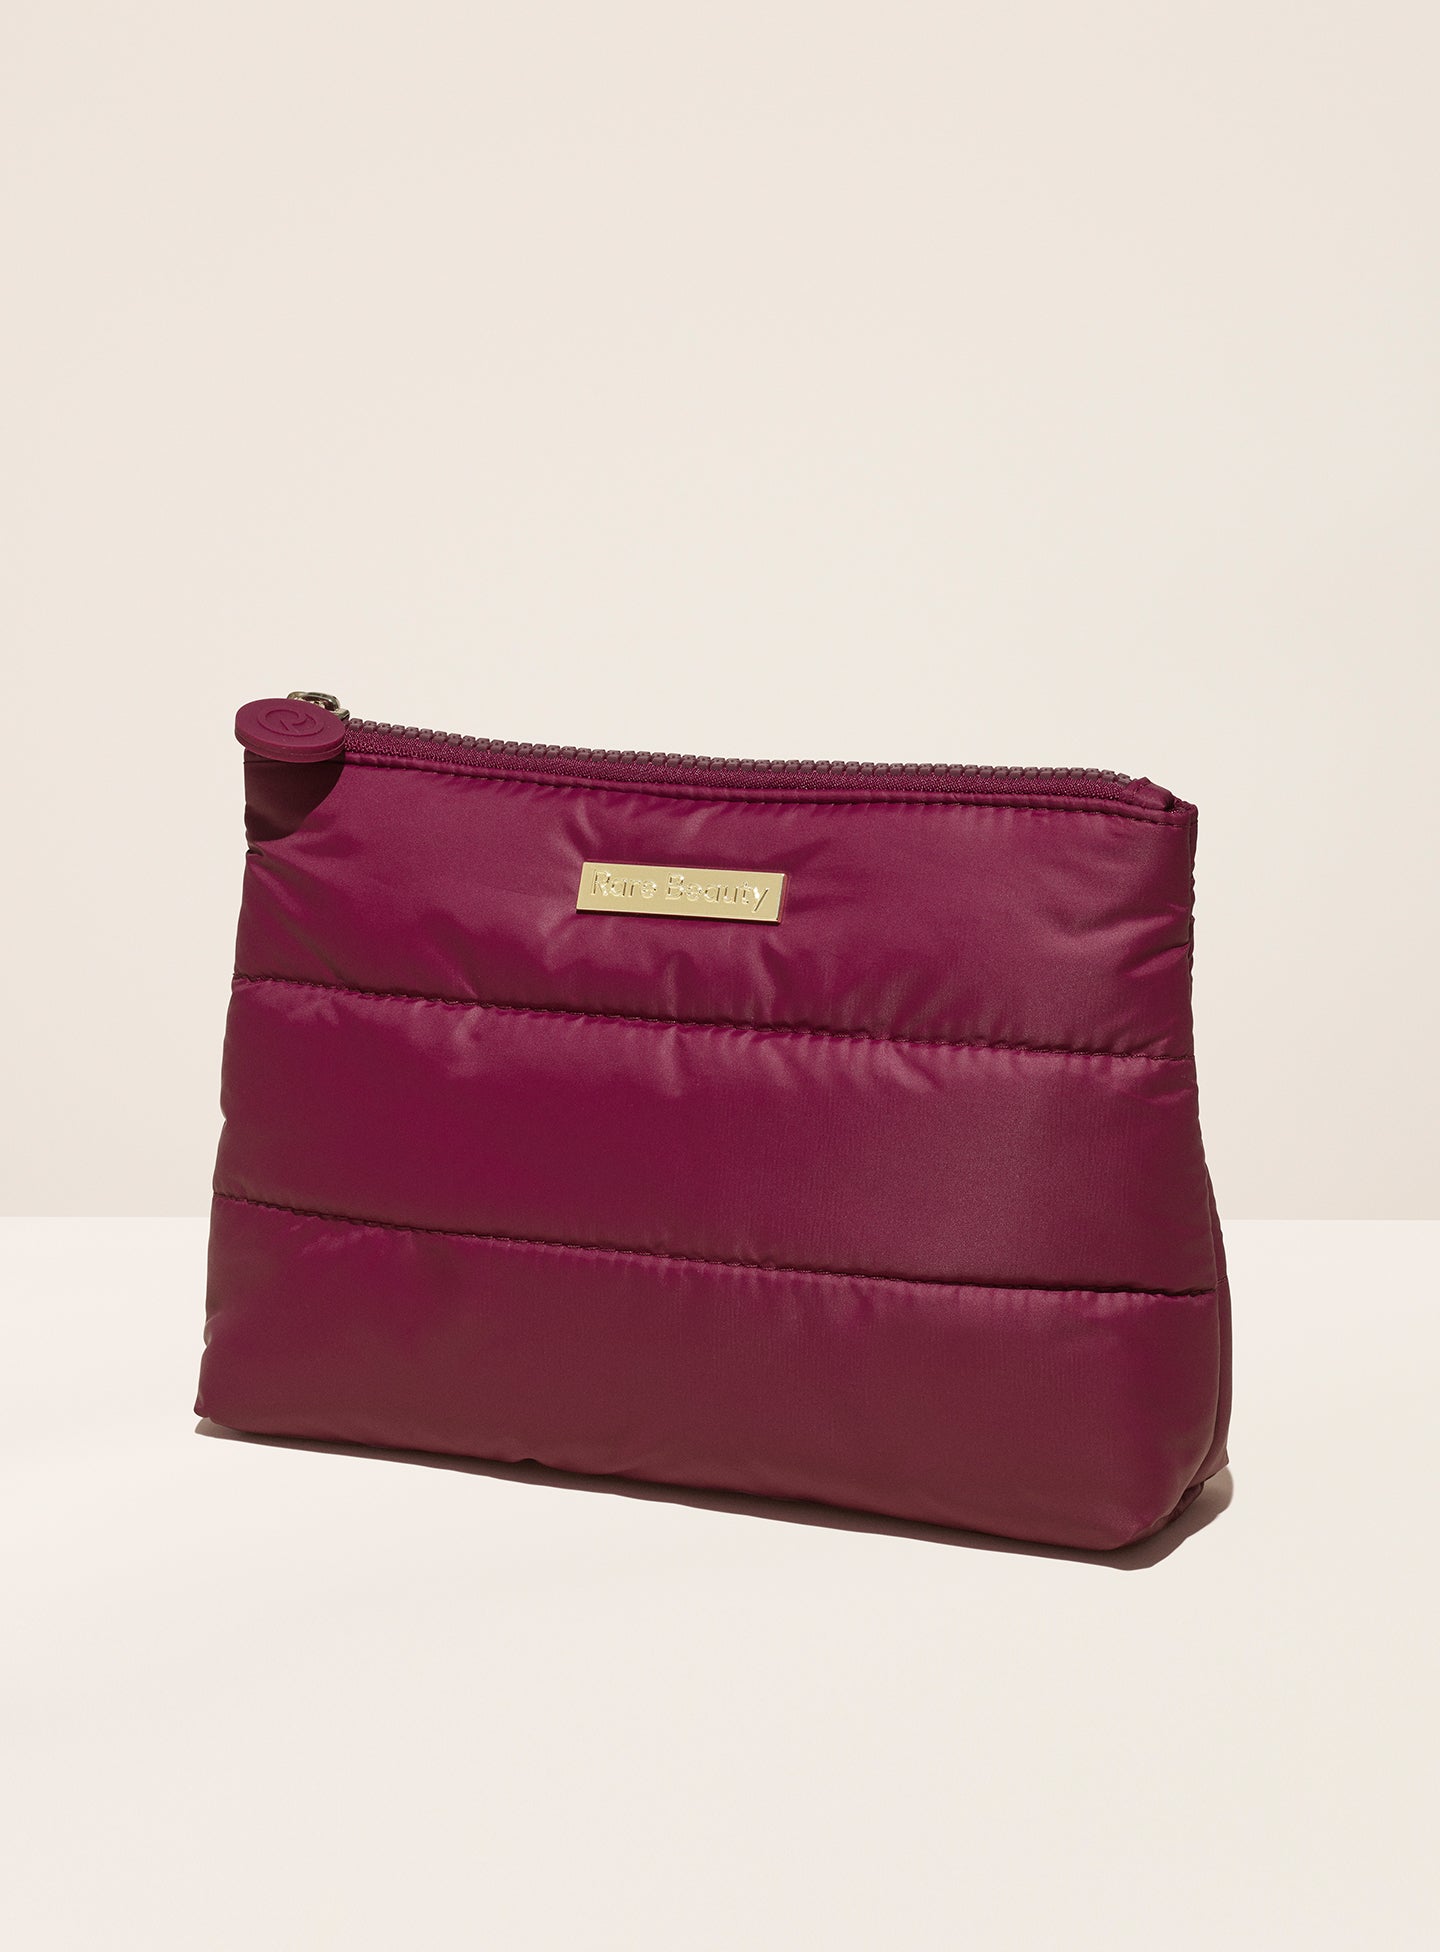 Rare Beauty - Puffy Makeup Bag - Sultry Berry